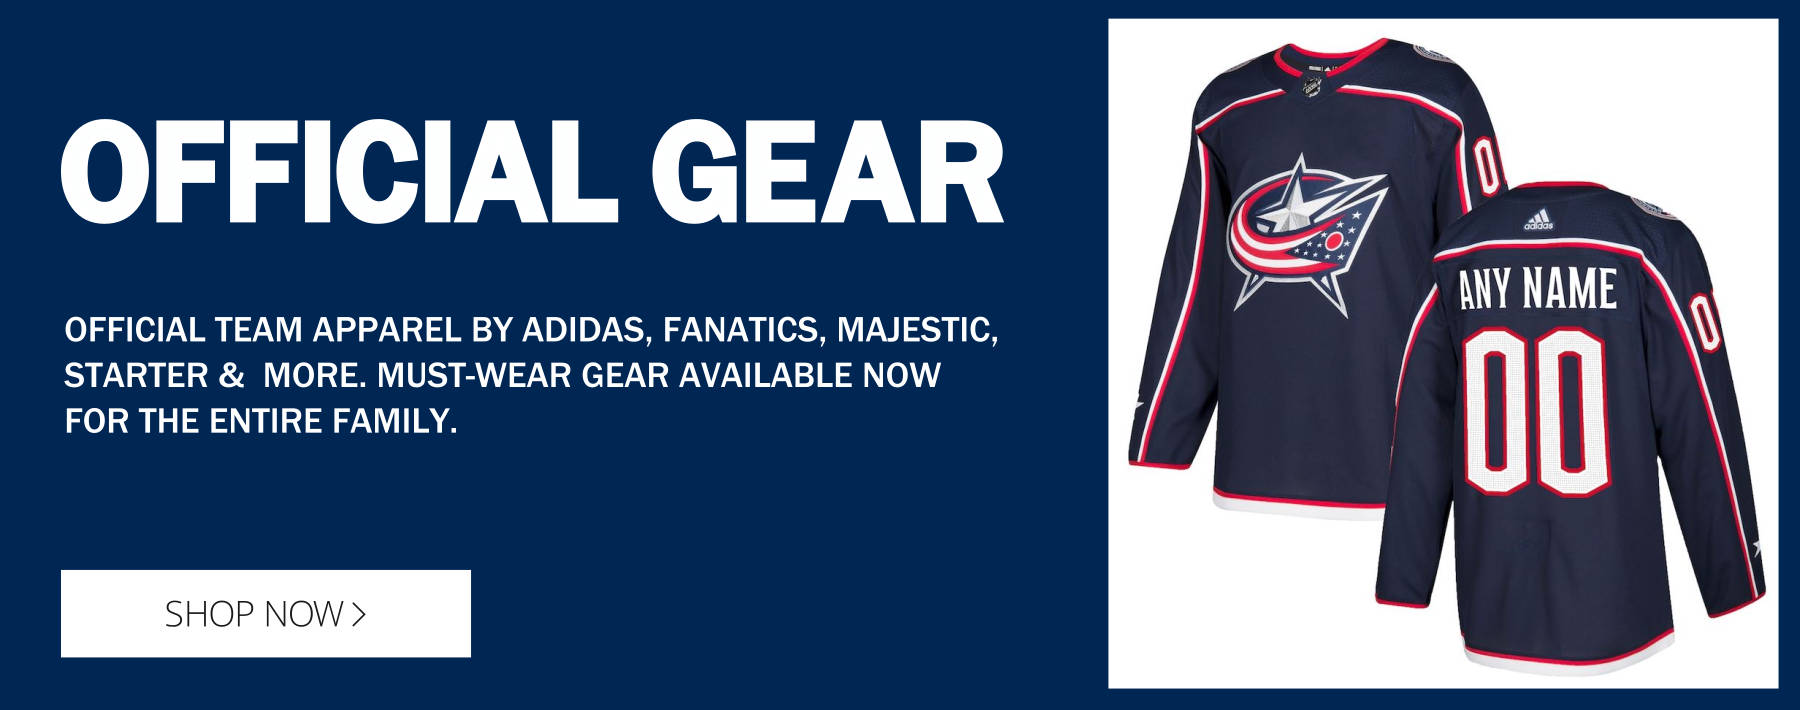 Officially Licensed Columbus Blue Jackets Gear and Merchandise 